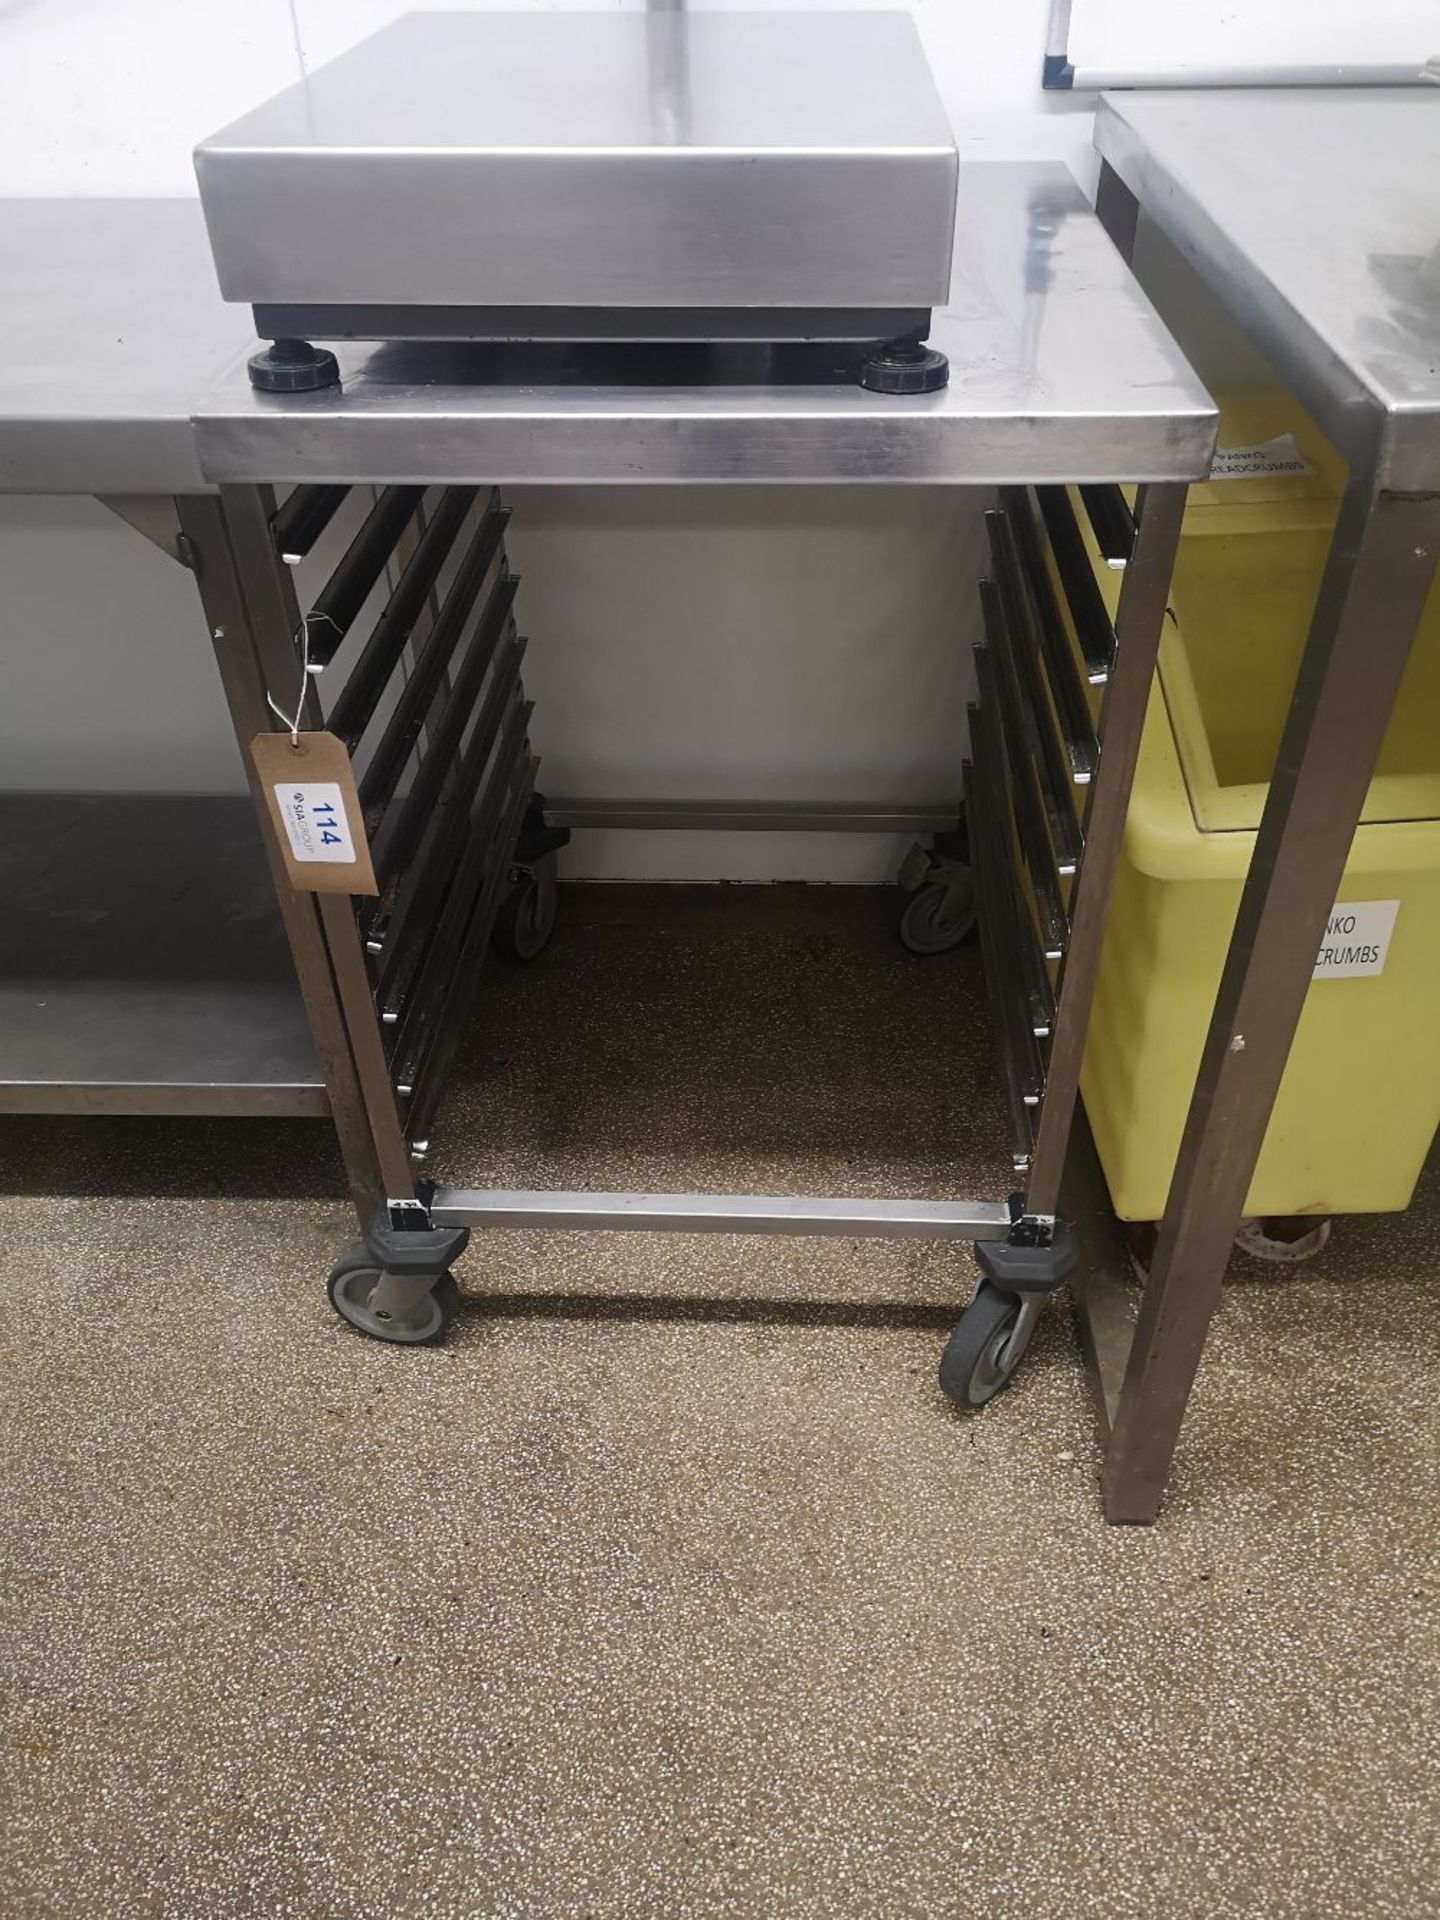 Stainless Steel Preparation Table with Eight Slot Baking Tray Rack